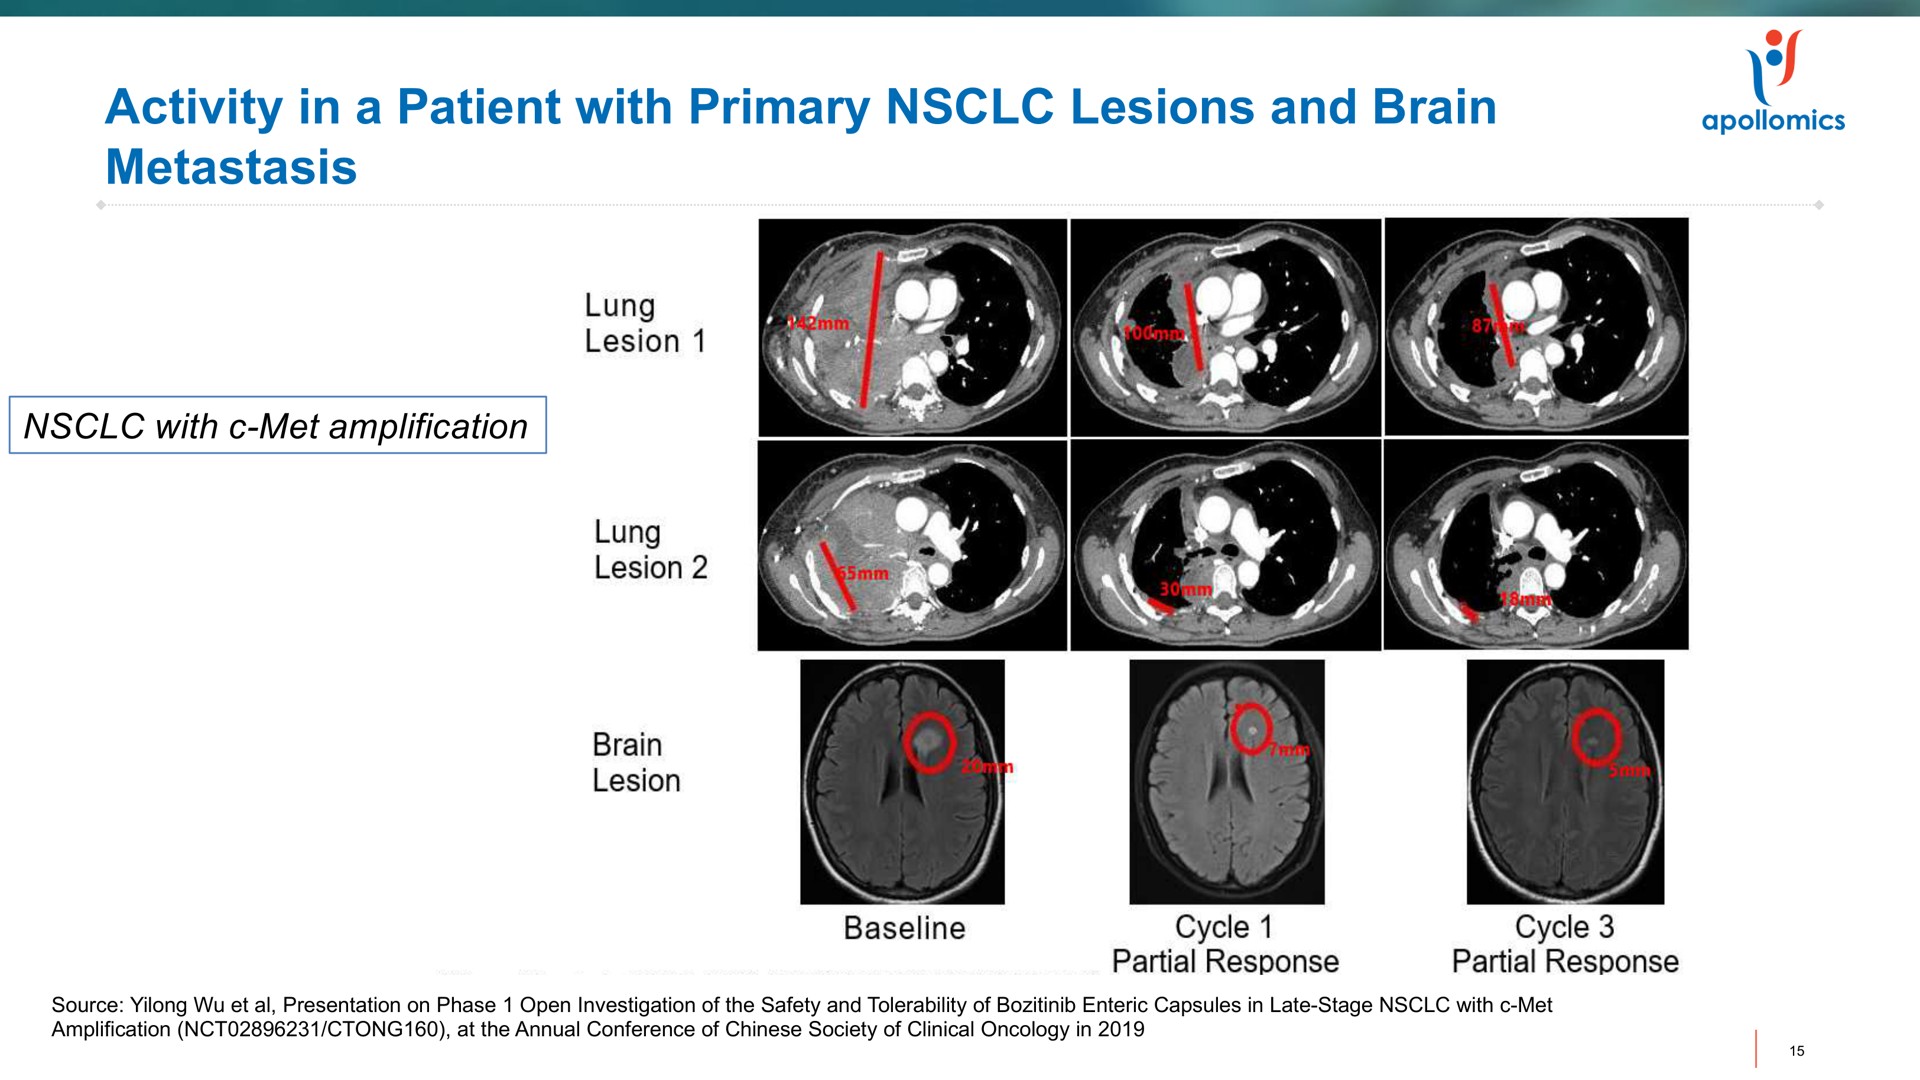 activity in a patient with primary lesions and brain metastasis | Apollomics